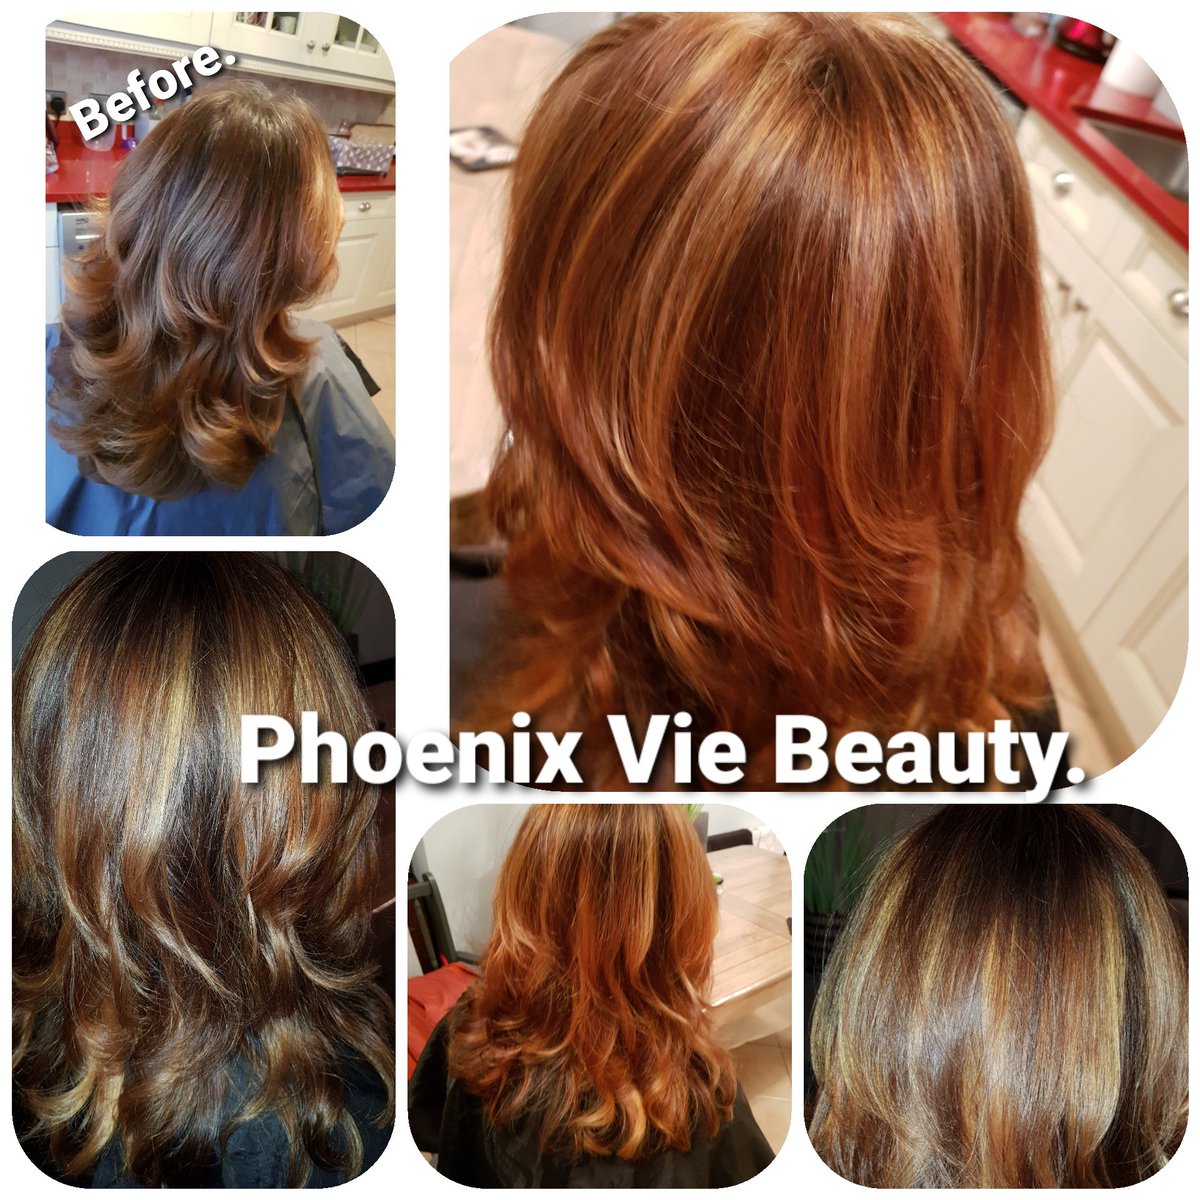 My fab #hair client. Marilyn had a #braidedBayalage of 3 colours followed by a cut and blow dry. 
#Phoenixviebeauty #Phoenix_Vie #MUAlife #makeupartist #swindonhairdresser #swindonhairstylist #MobileHairdresser #wiltshirehairartist #wiltshirehairdresser #wiltshiremakeupartist